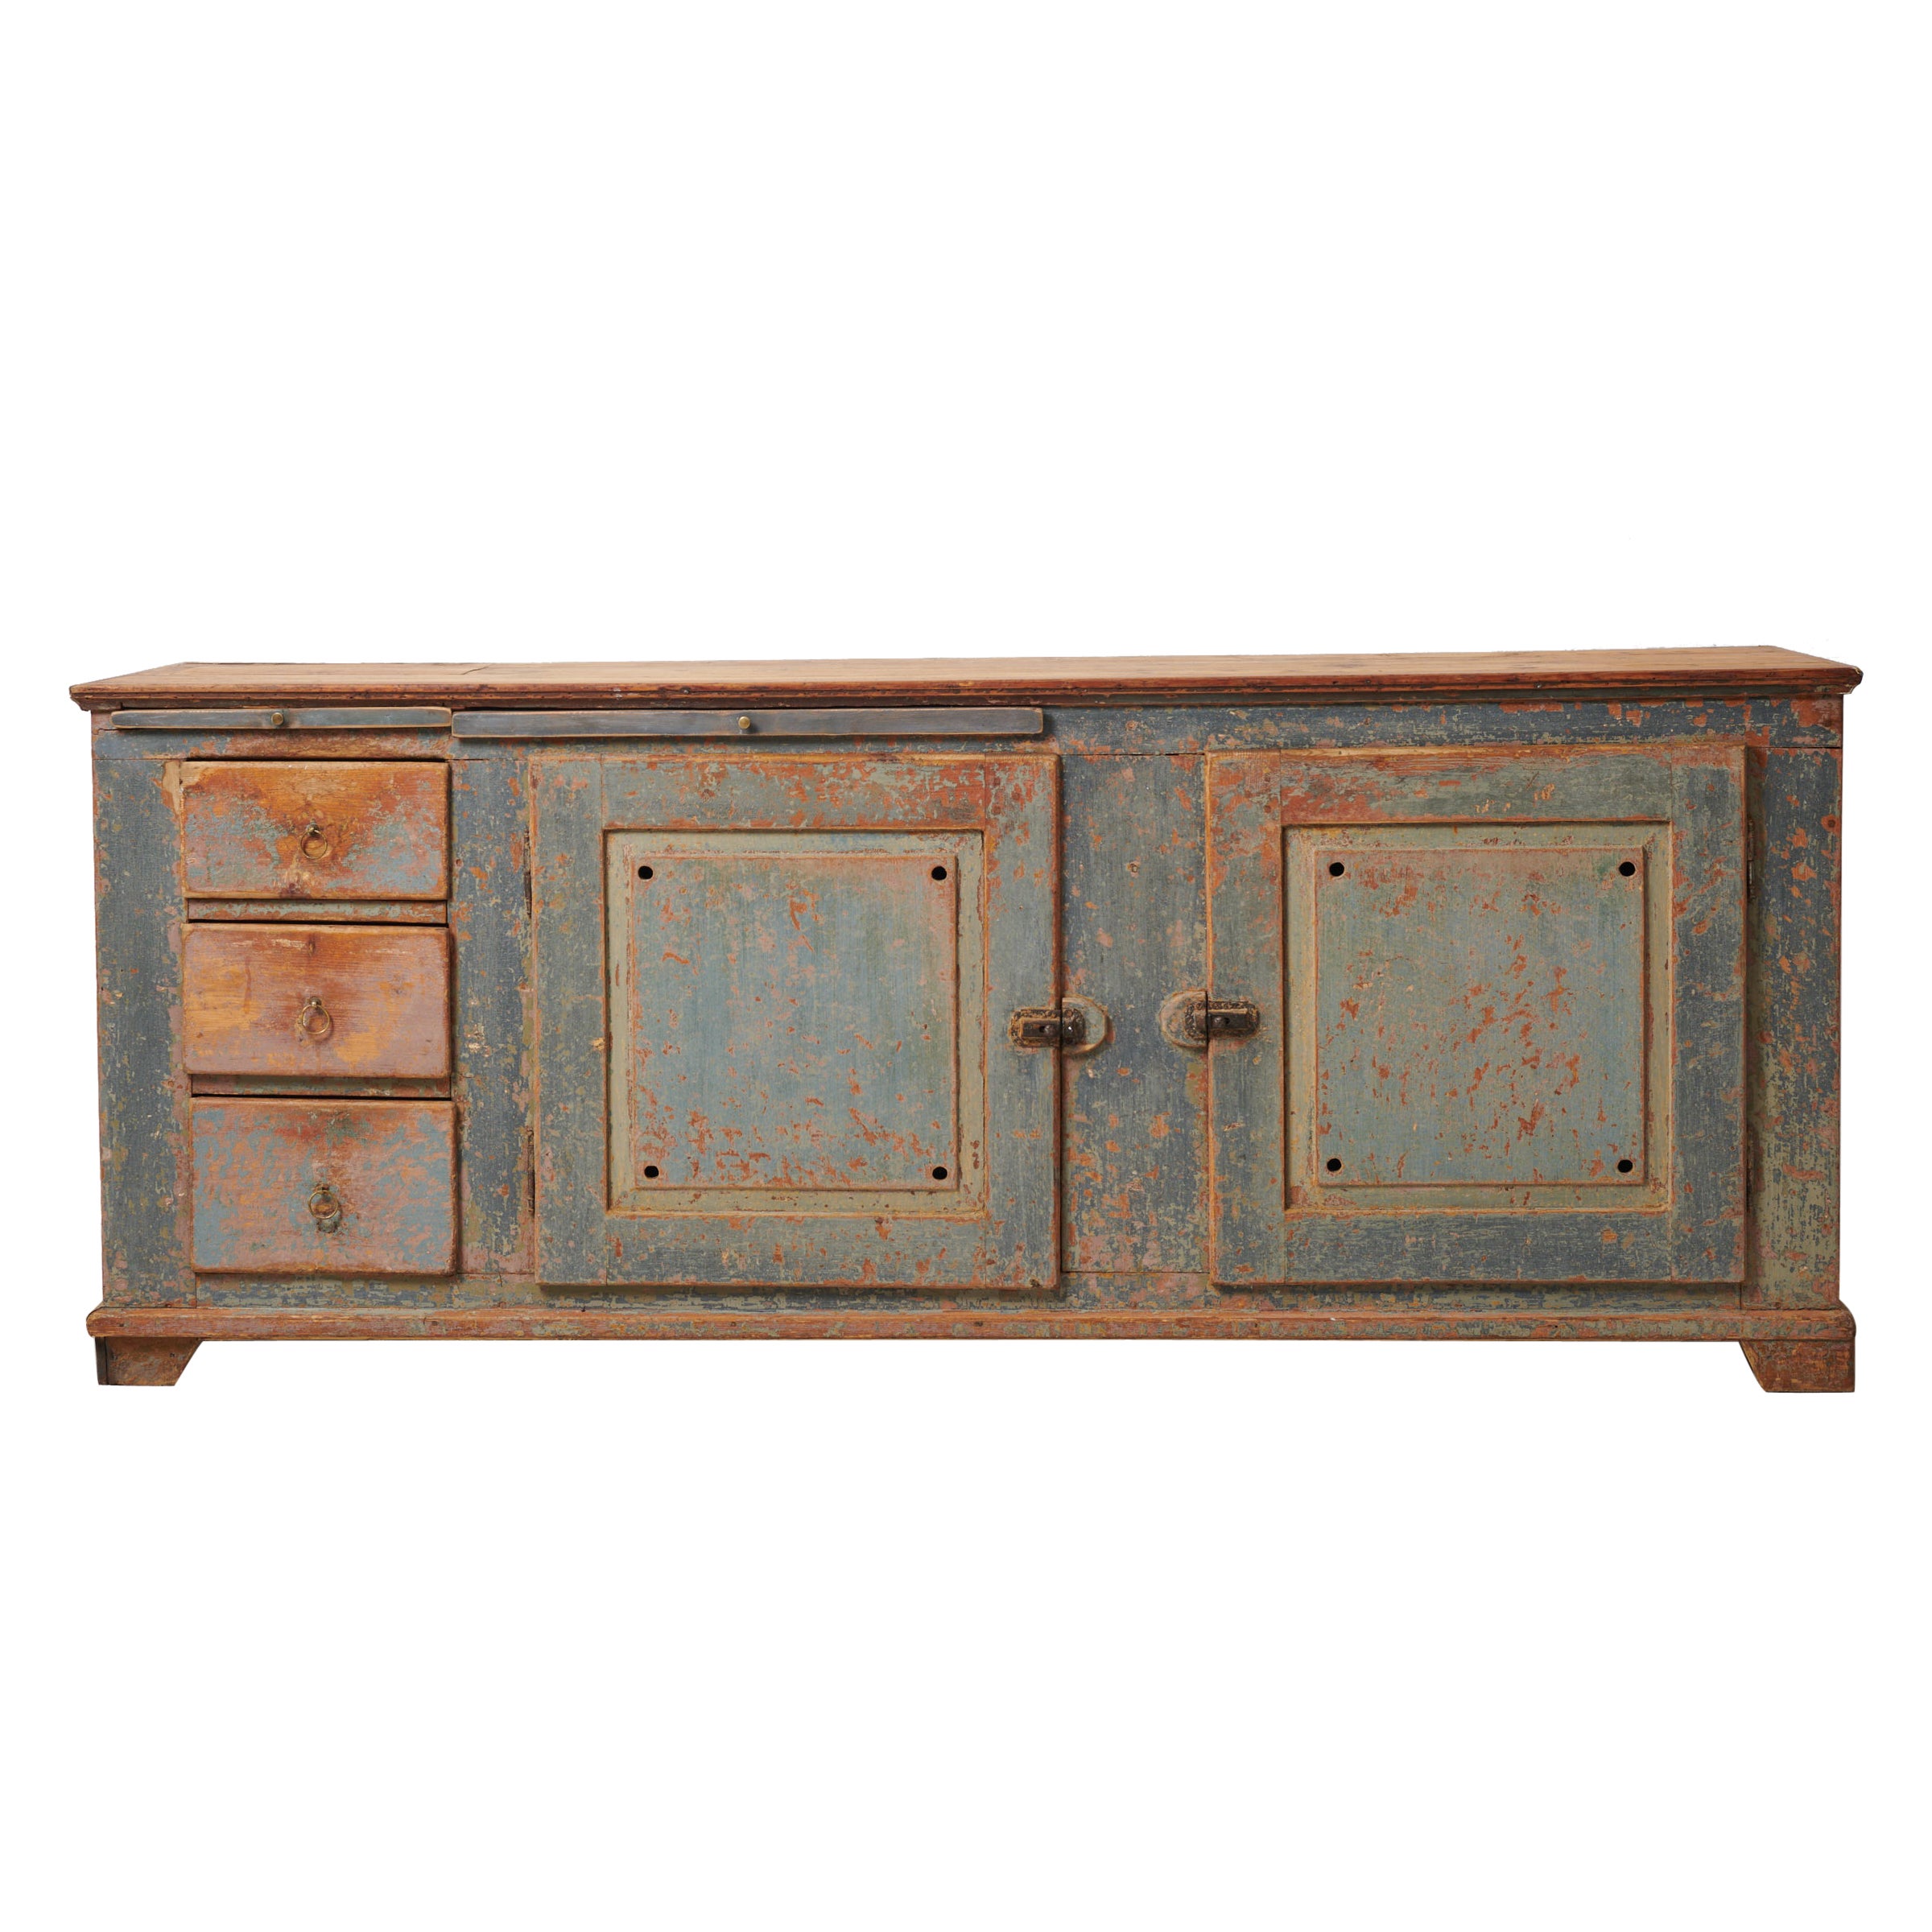 Antique Low and Wide Genuine Swedish Country Sideboard